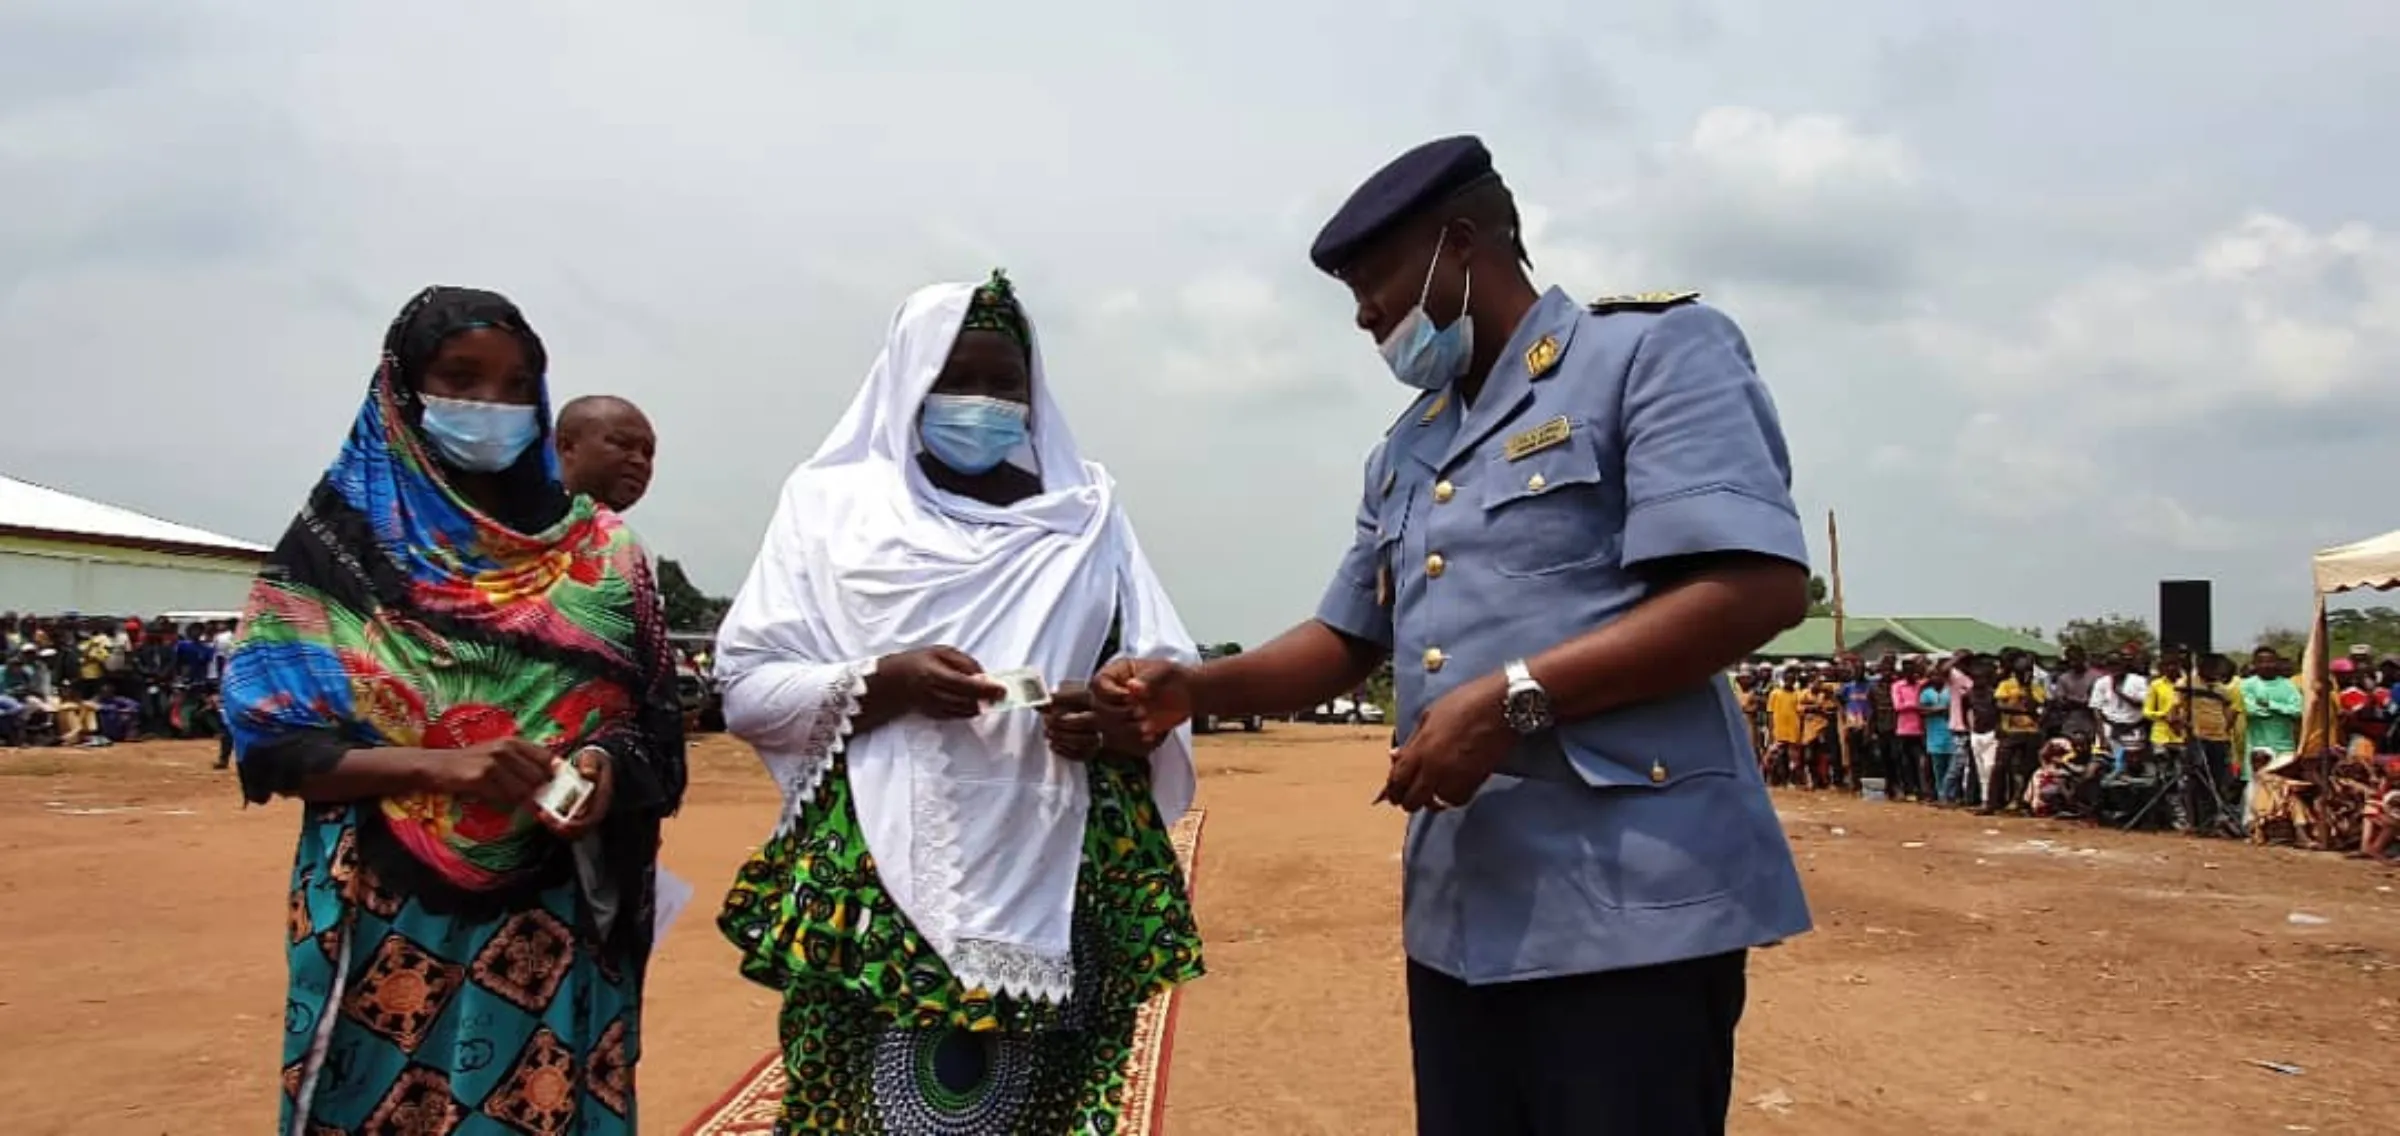 An official dressed in uniform hands out an ID card to a refugee standing with her friend in a camp in Cameroon